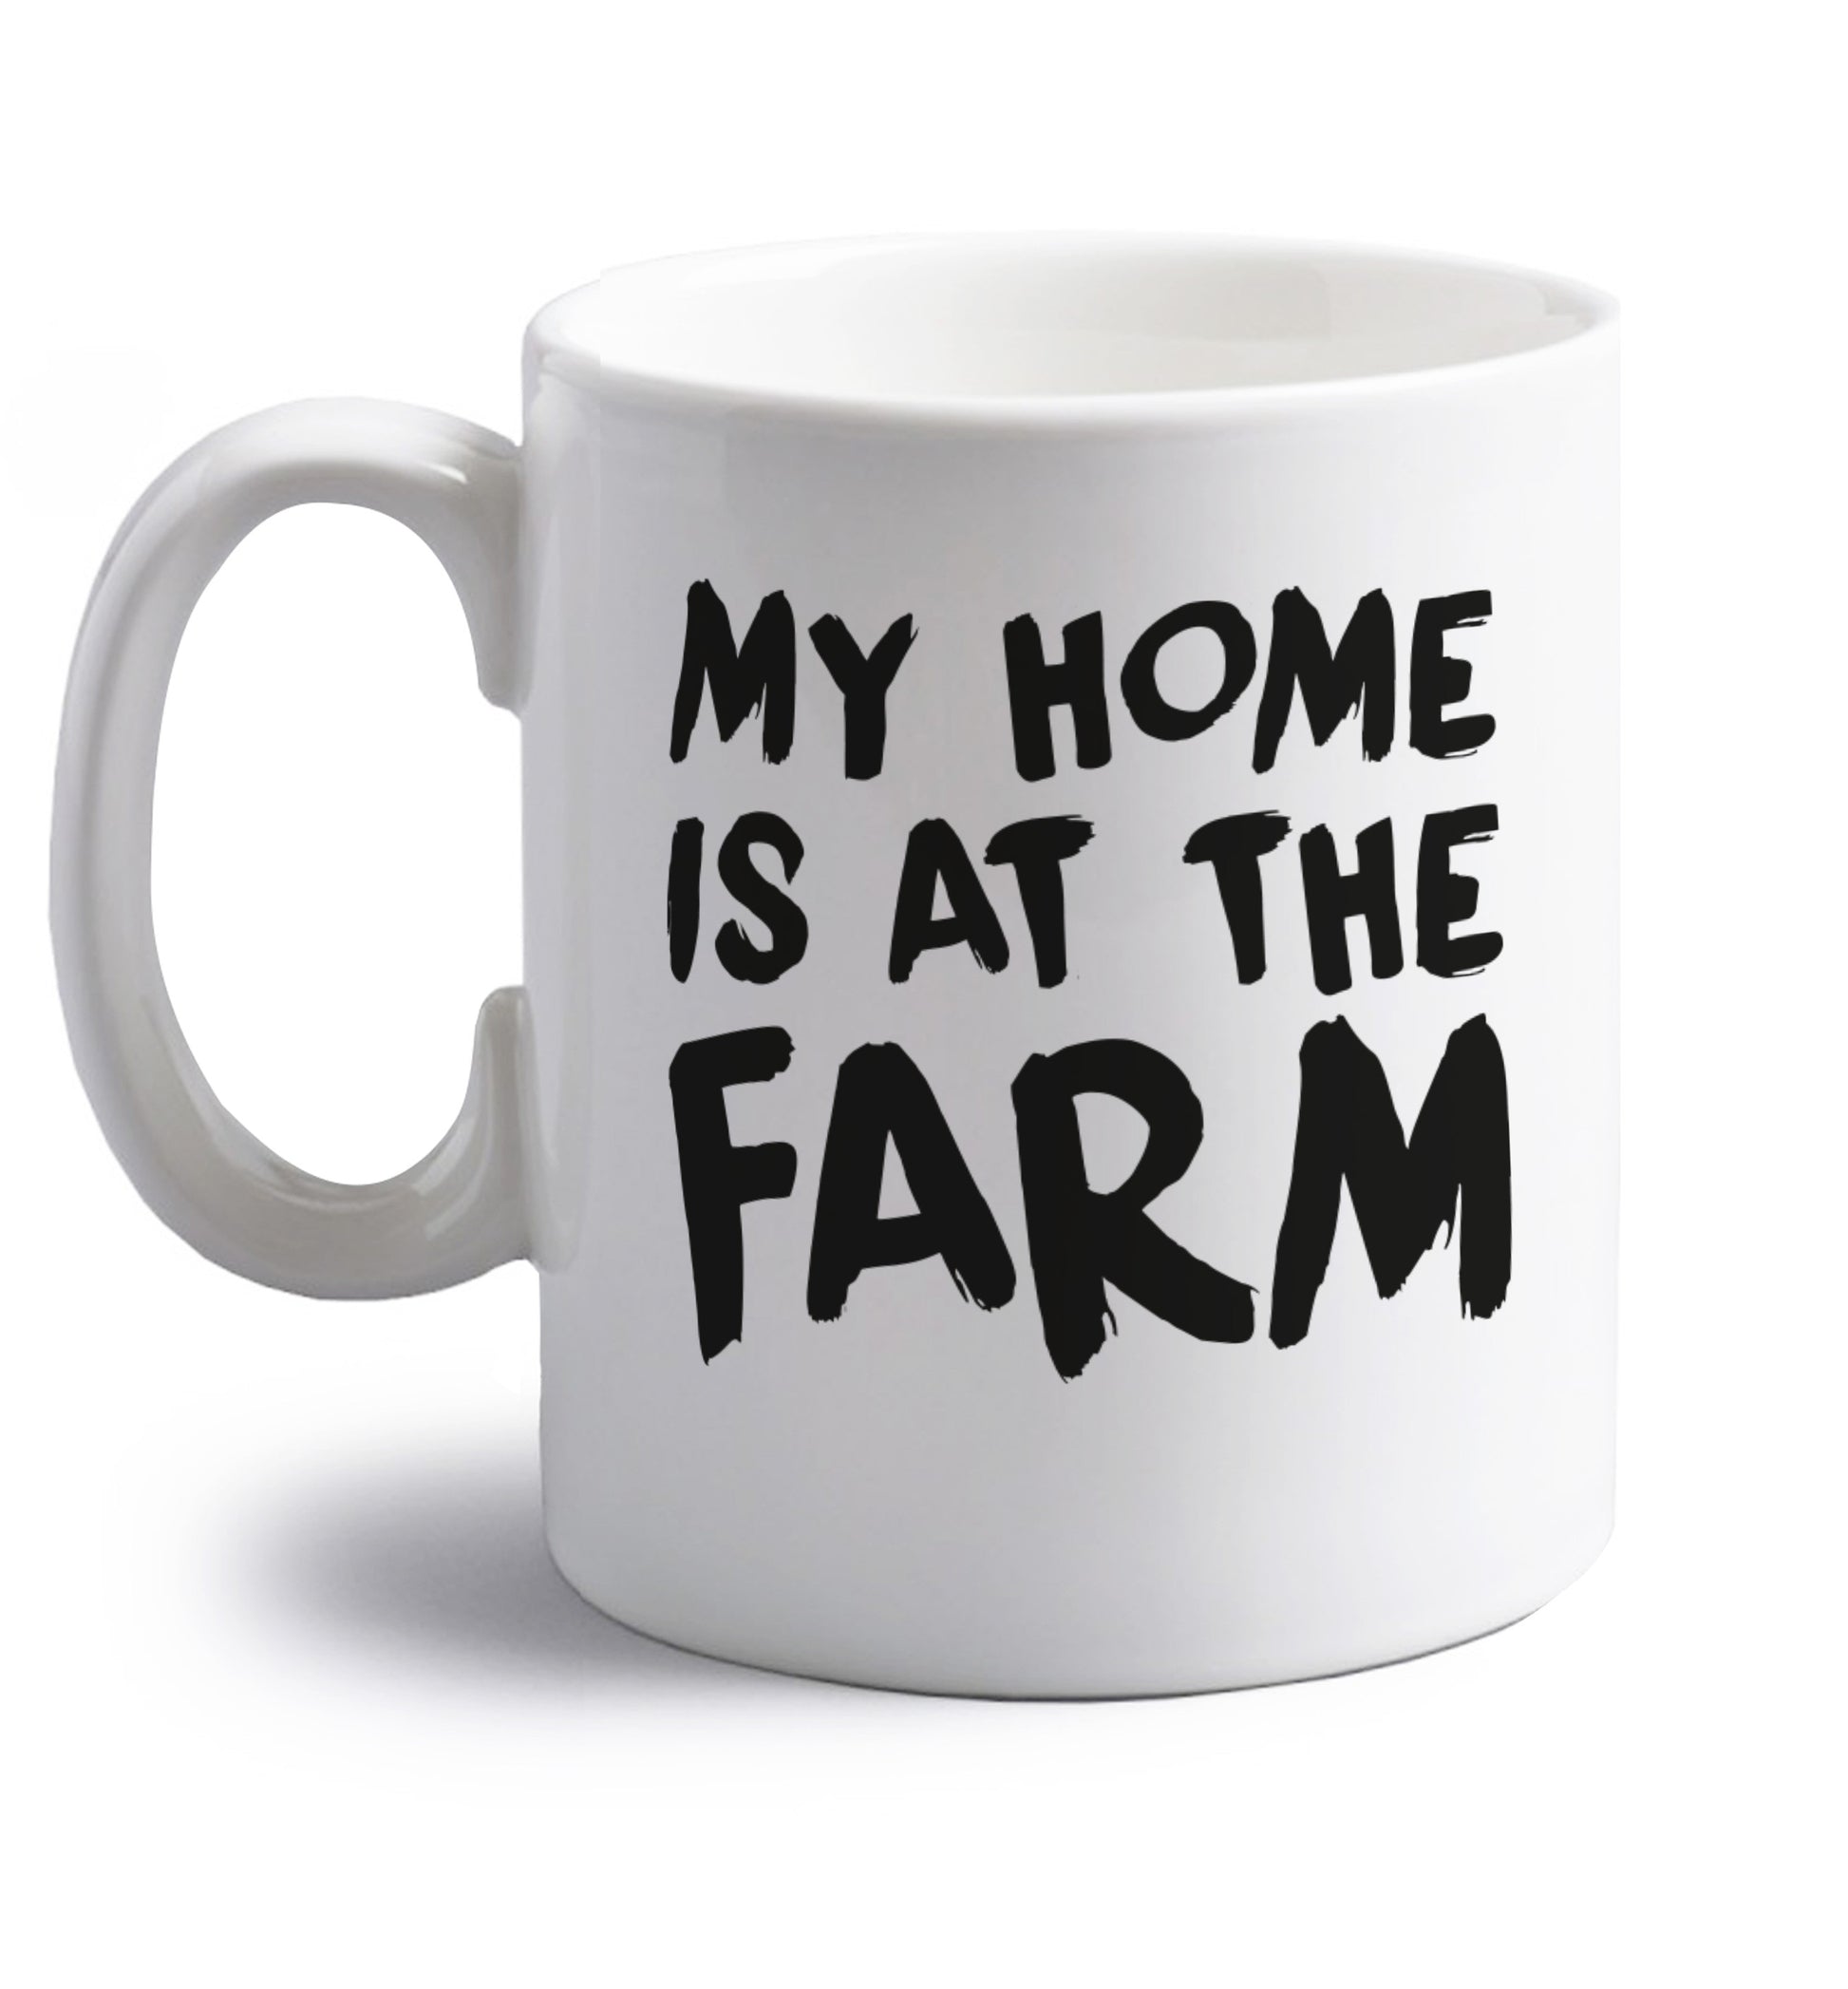 My home is at the farm left handed white ceramic mug 